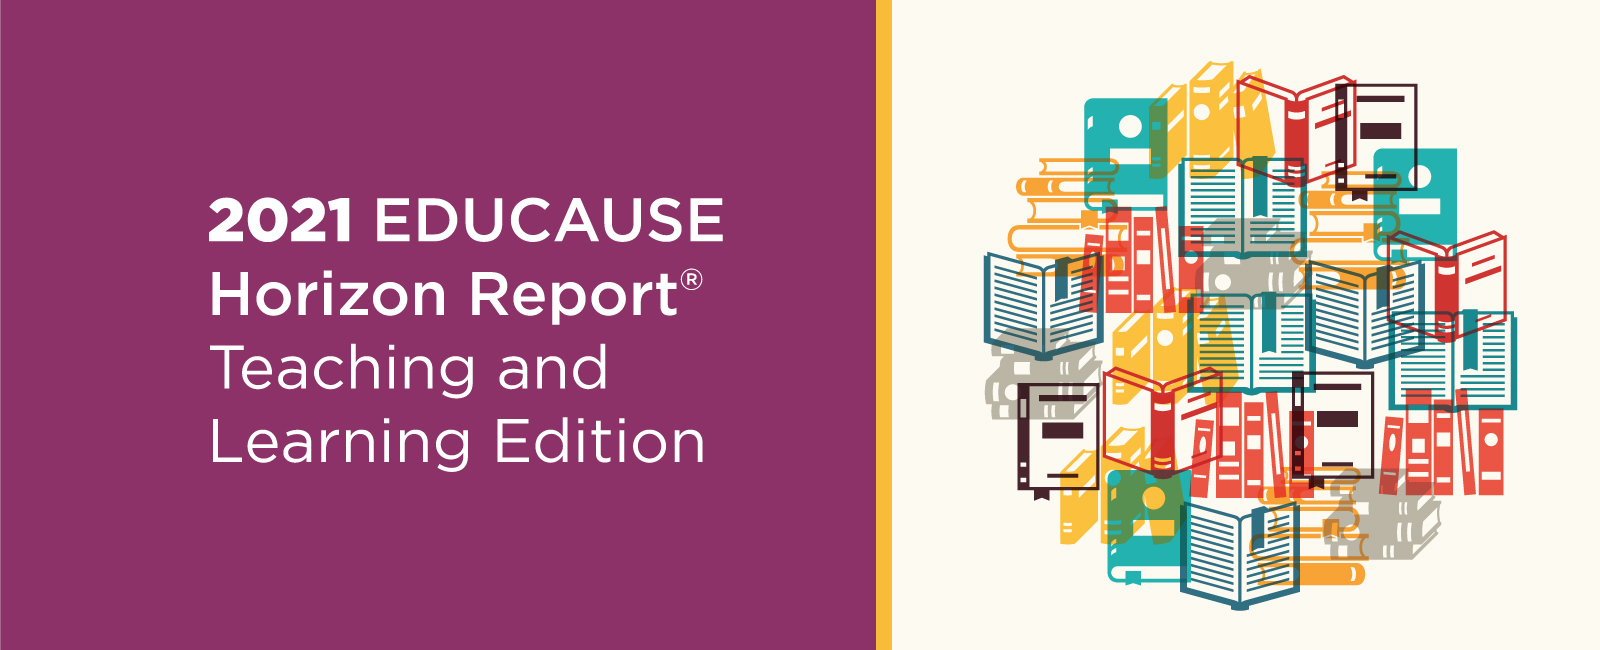 2021 EDUCAUSE Horizon Report® | Teaching and Learning Edition